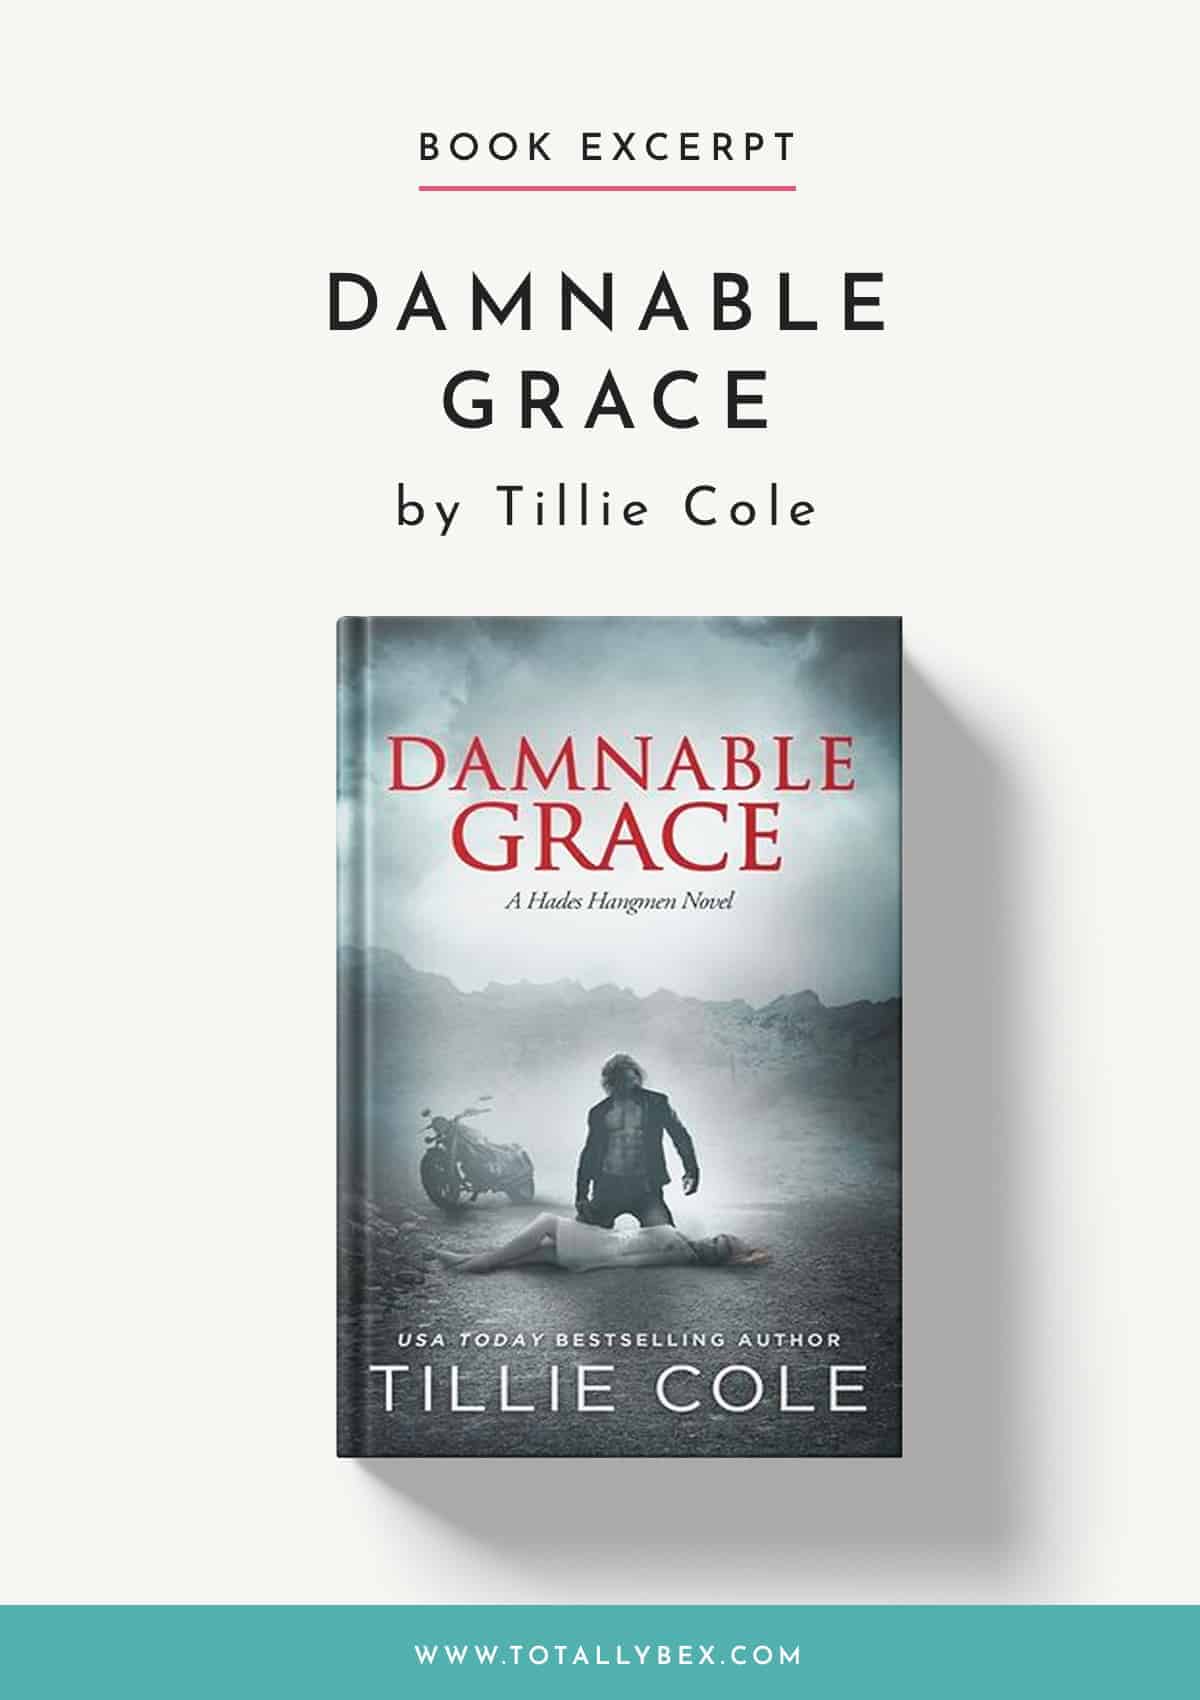 Damnable Grace by Tillie Cole – Hades Hangmen Book 5